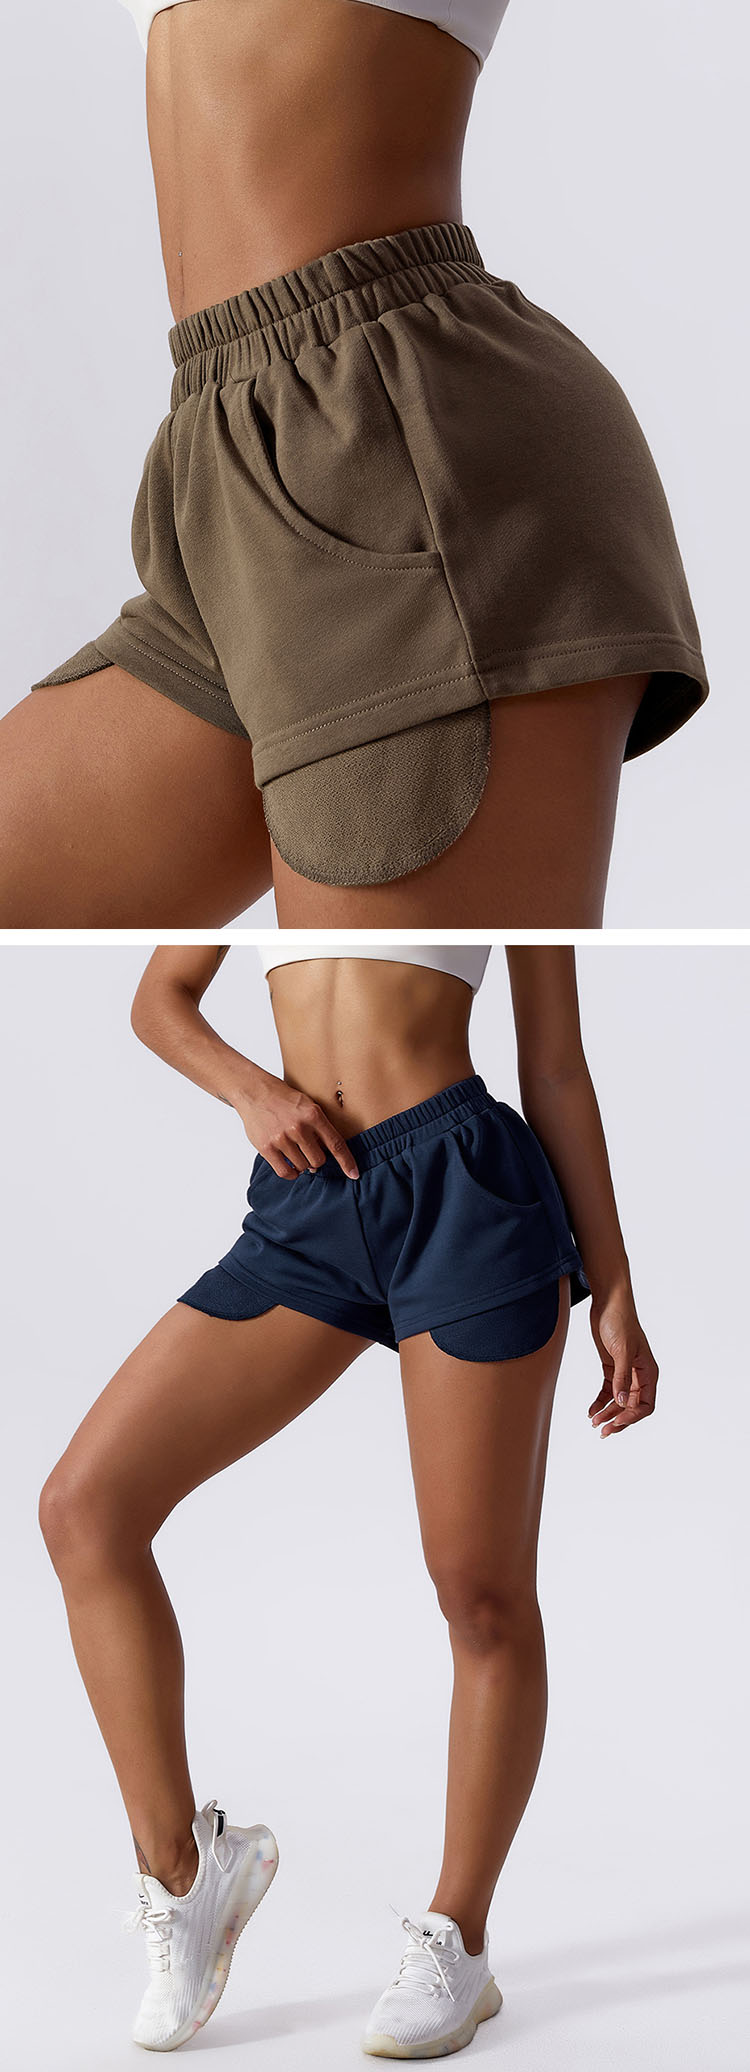 High-quality fabrics are used to absorb moisture and sweat, and fit the body